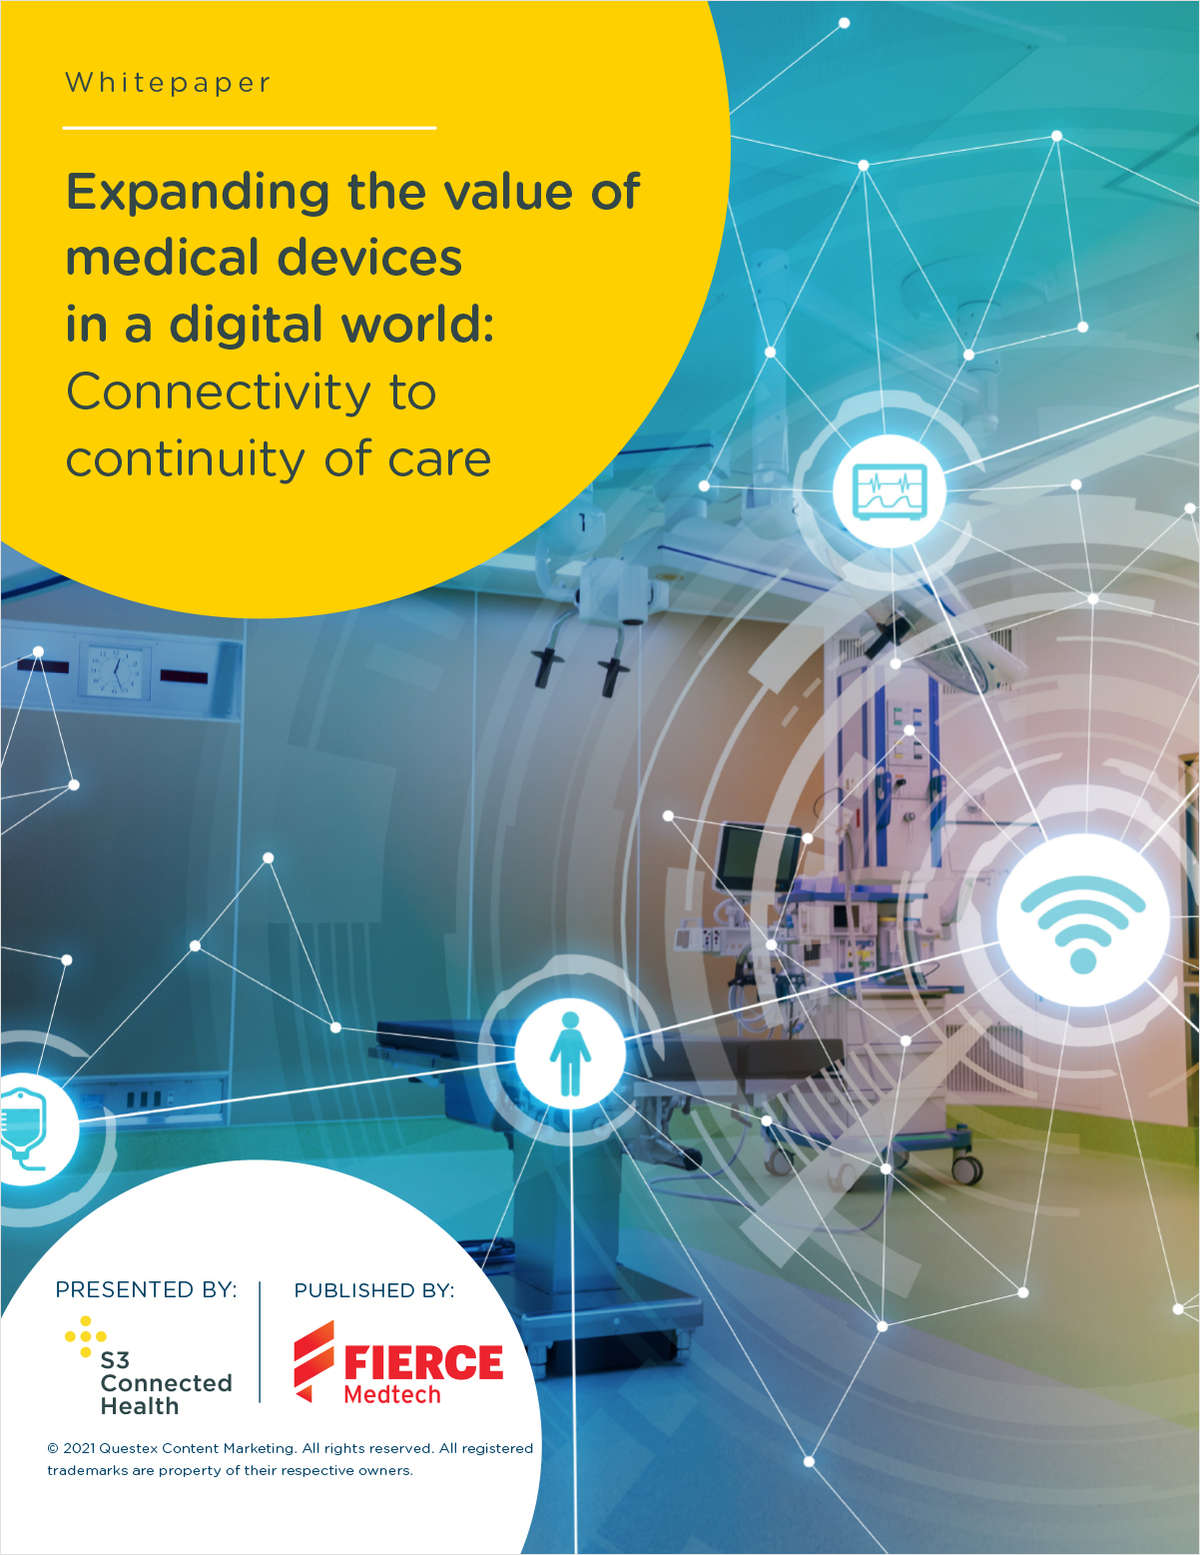 Expanding the value of medical devices in a digital world: Connectivity to continuity of care